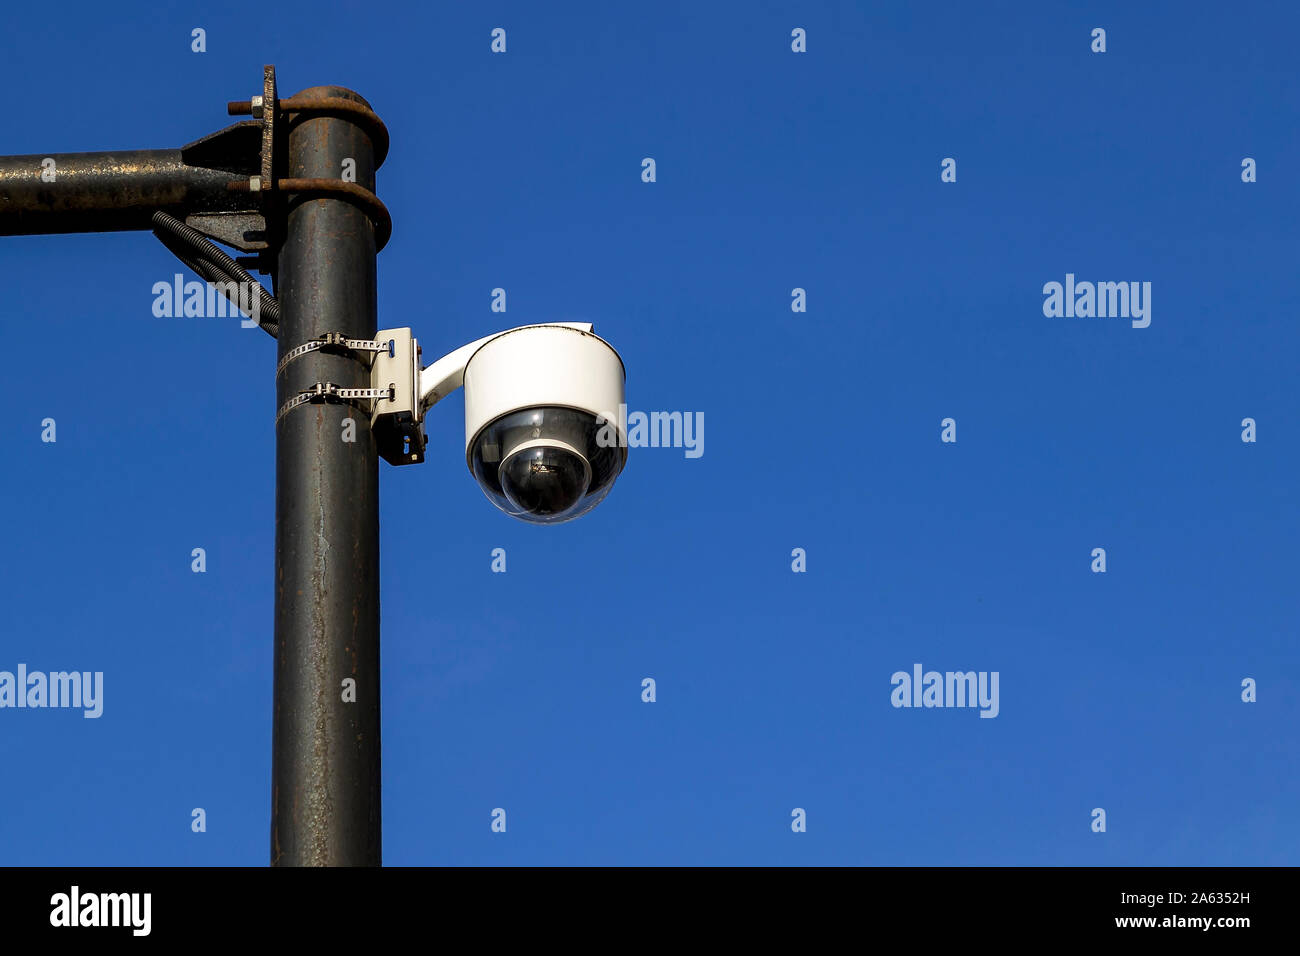 White street camera of external supervision installed on an outdoors pole against a blue sky. Modern CCTV camera, surveillance and monitoring. Copy sp Stock Photo